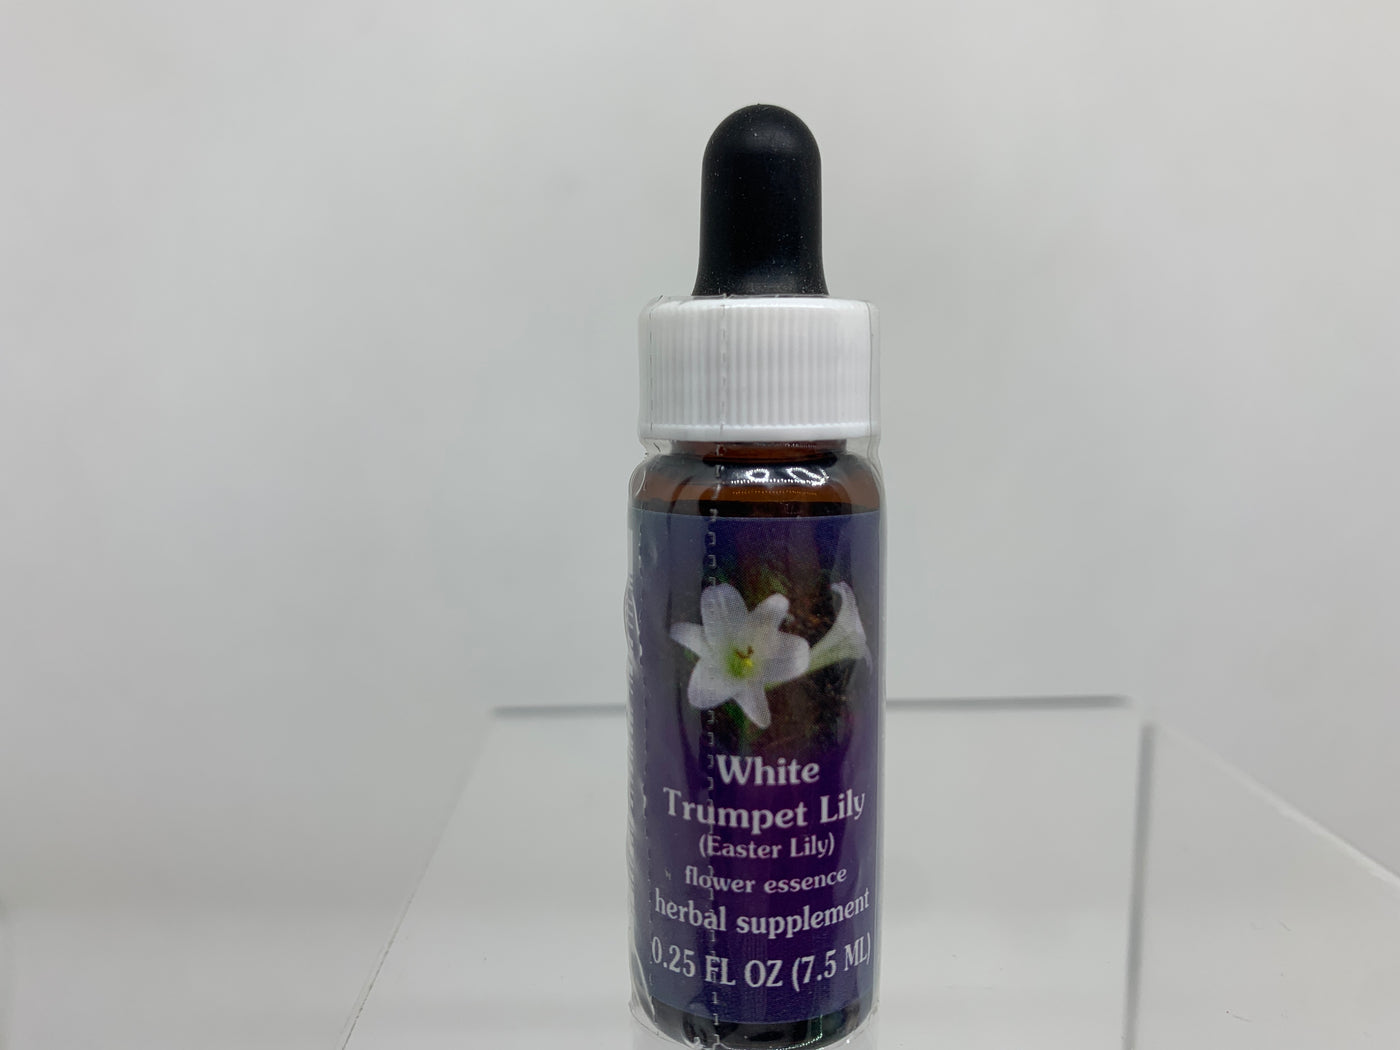 FES Flower Essence (1/4 oz), Easter Lily (White Trumpet Lily)